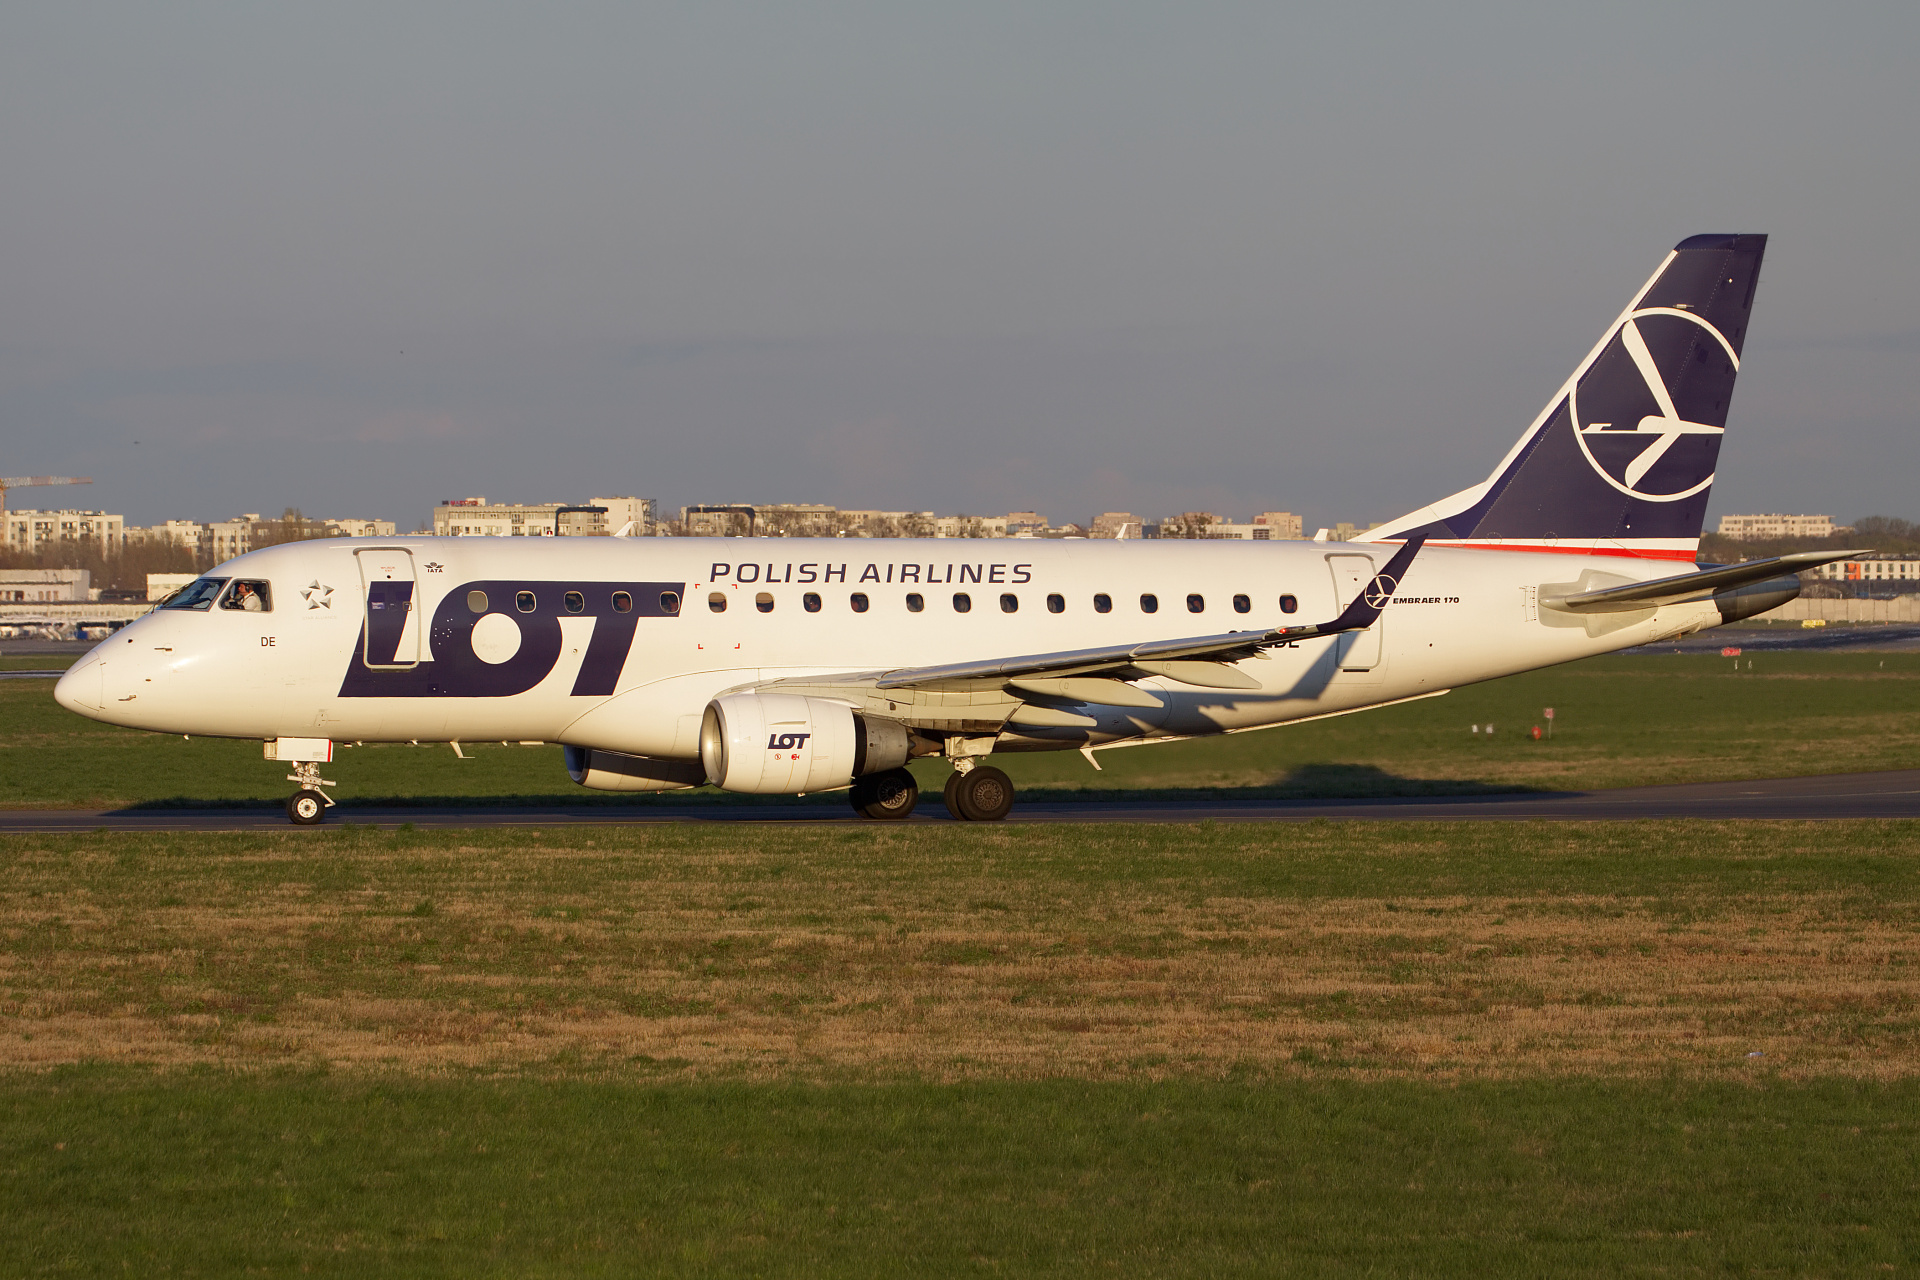 SP-LDE (new livery) (Aircraft » EPWA Spotting » Embraer E170 » LOT Polish Airlines)